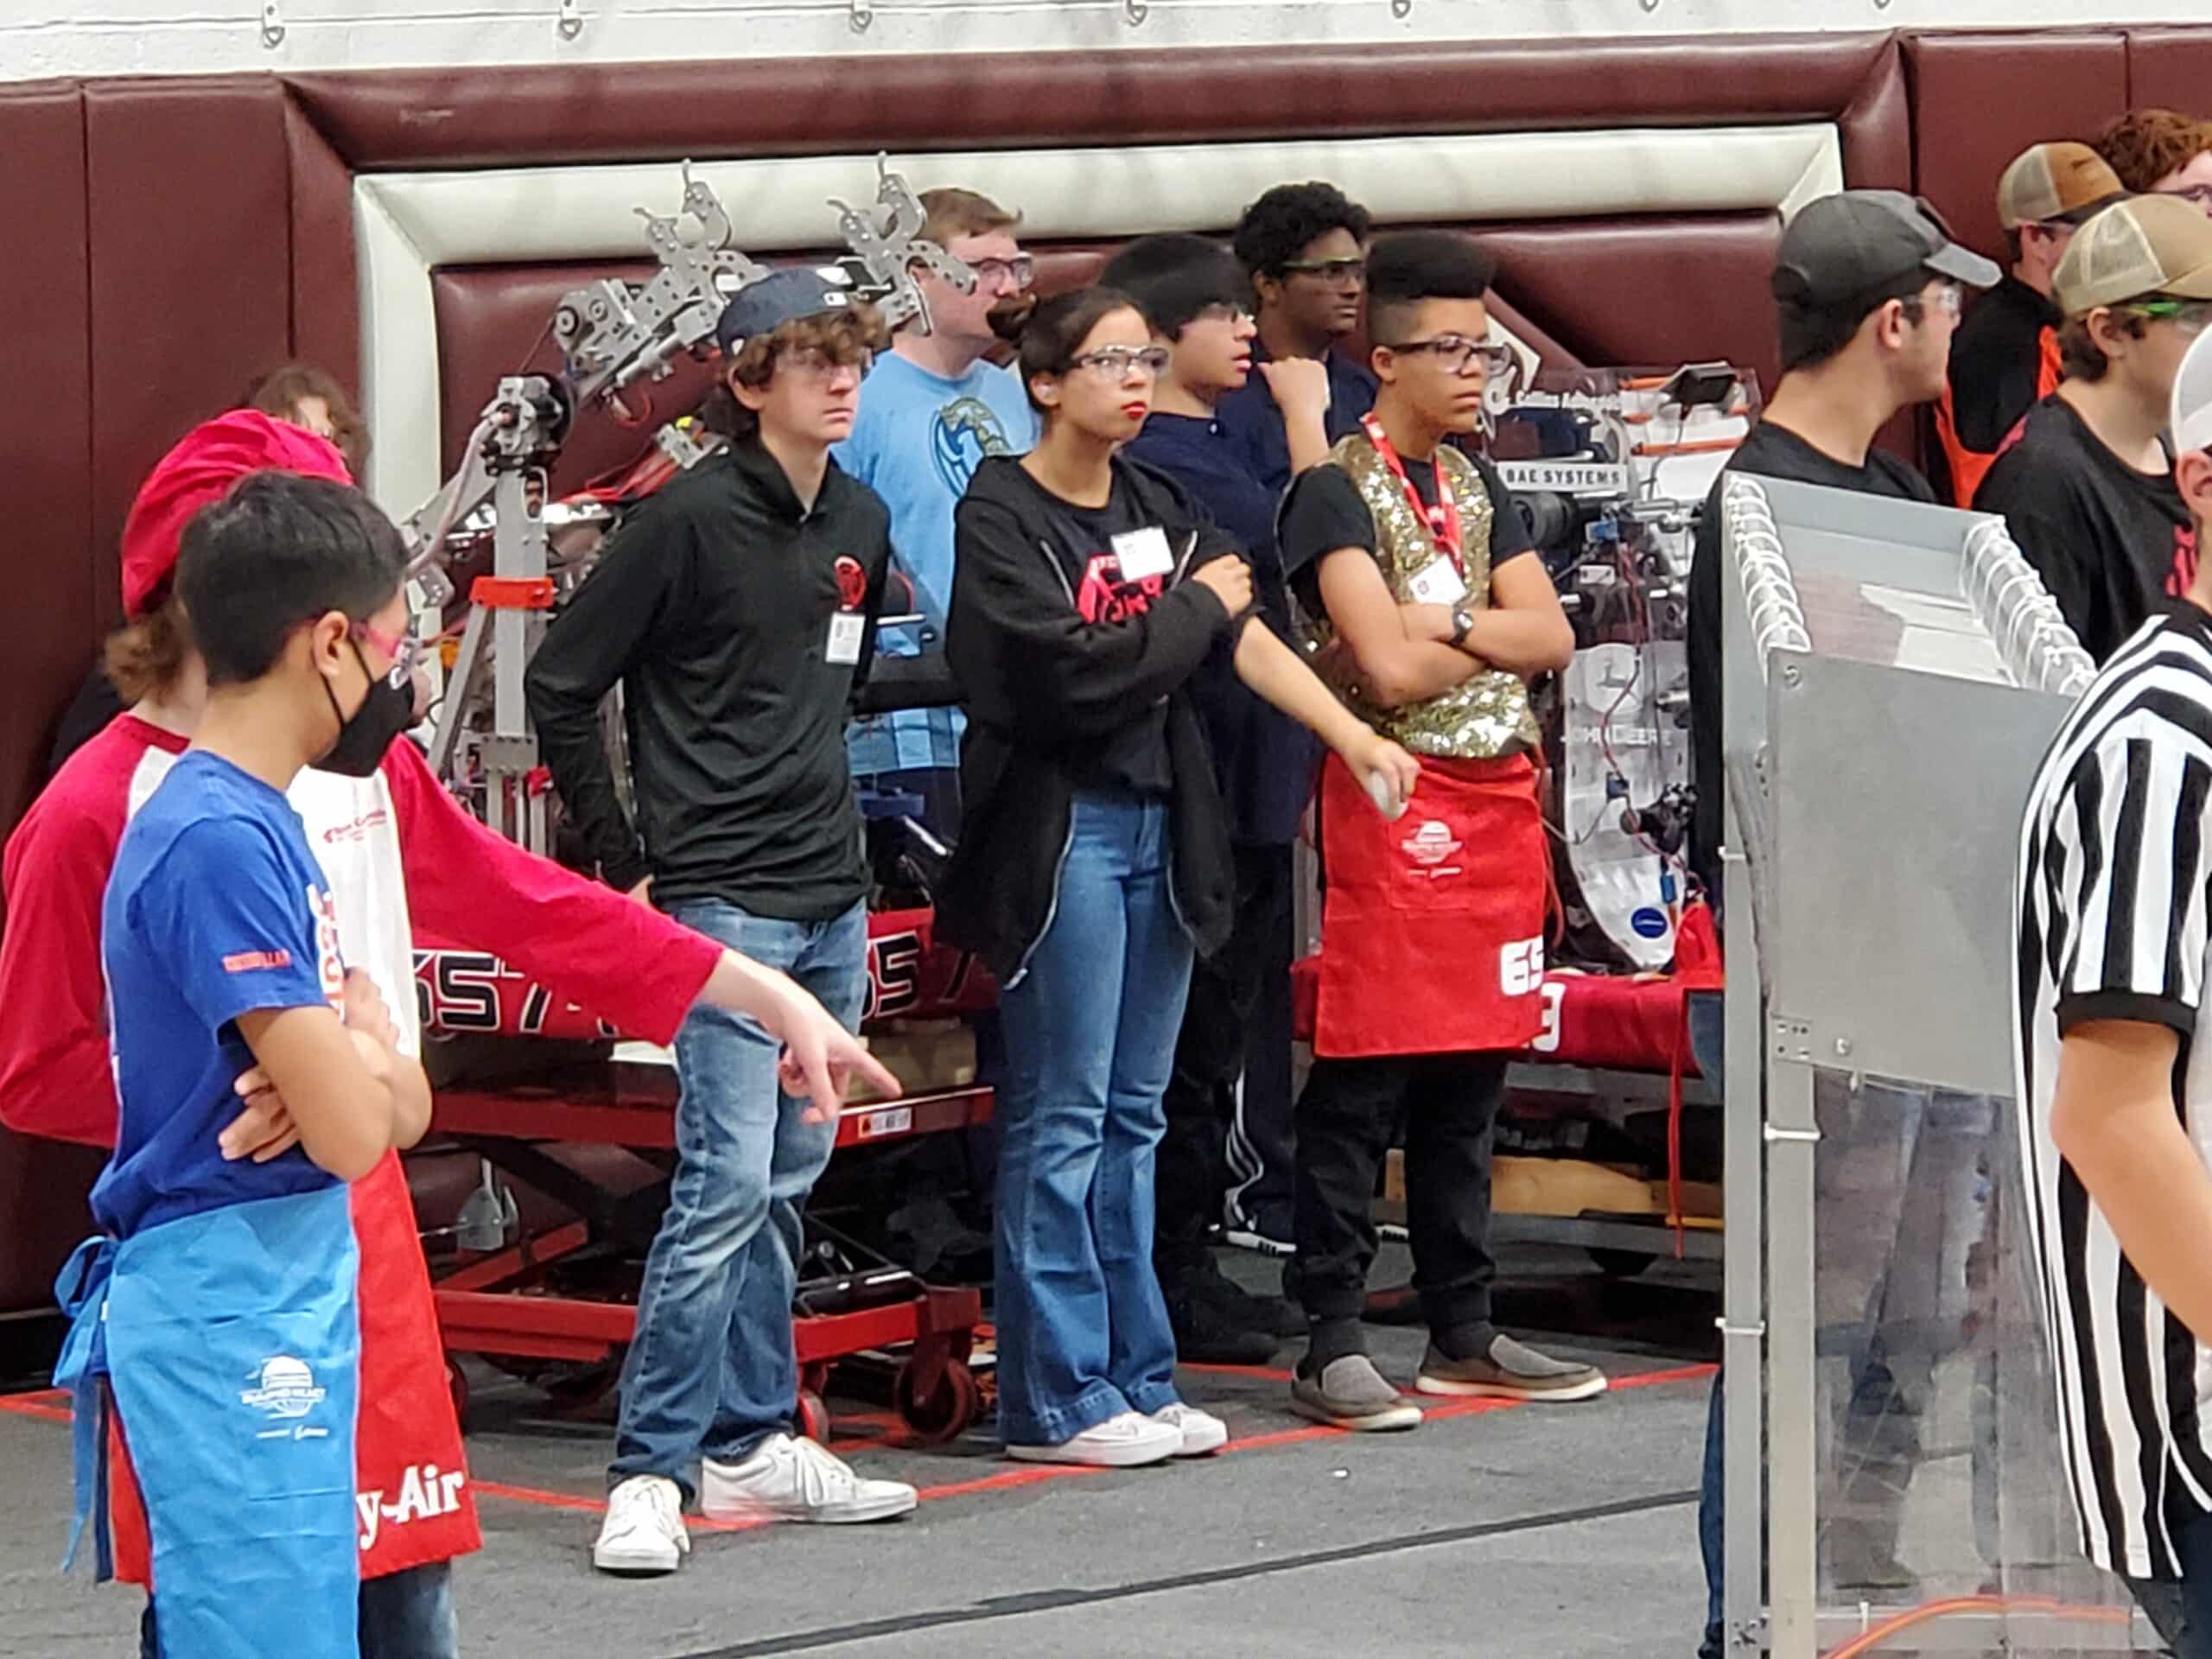 Drive Team in the Queue for a Qualification Match